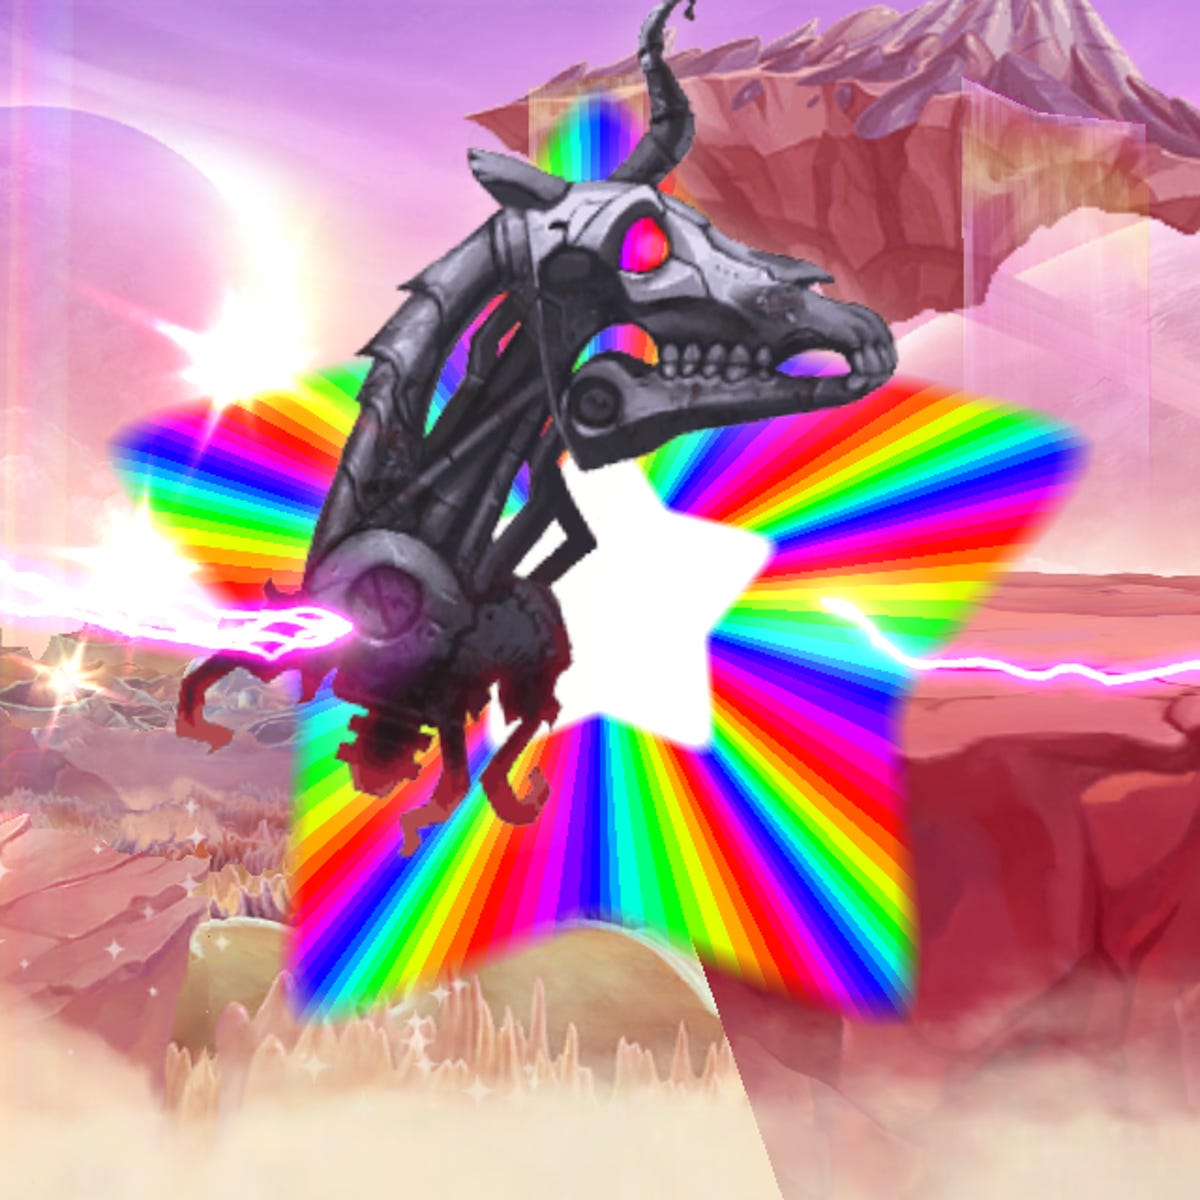 Robot Unicorn Attack (iOS) review: The most majestic running game just better - CNET